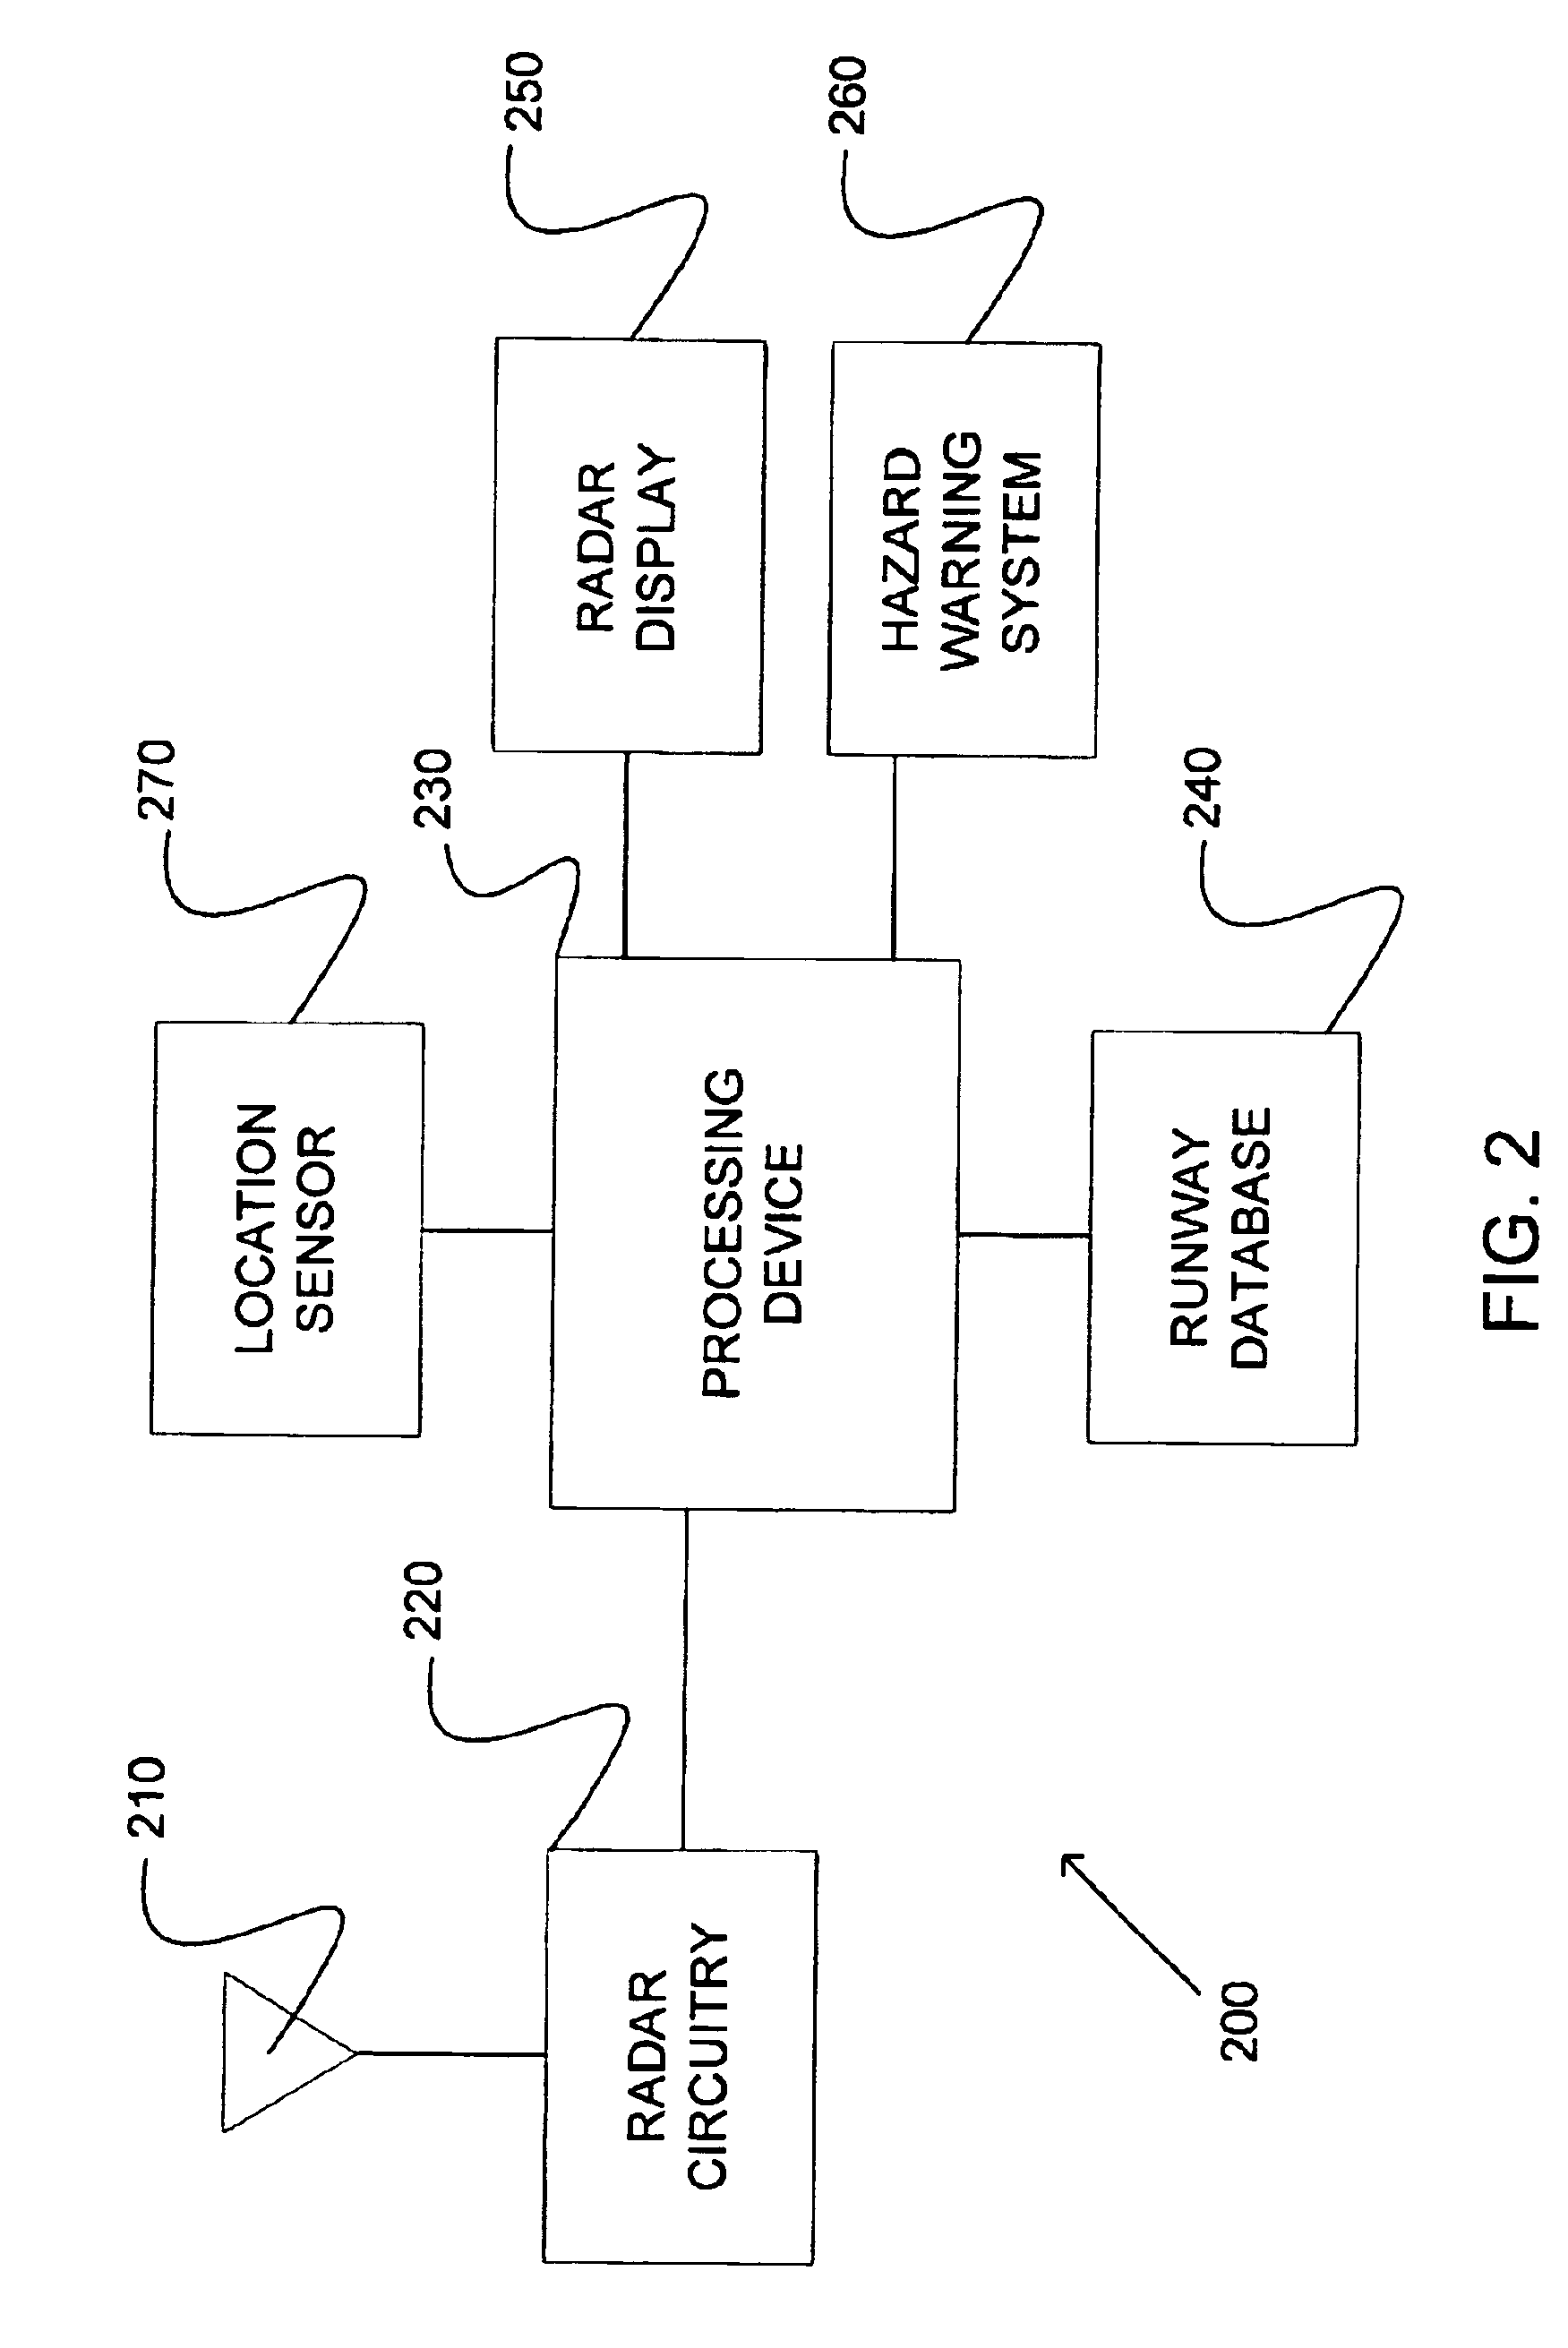 Runway obstacle detection system and method